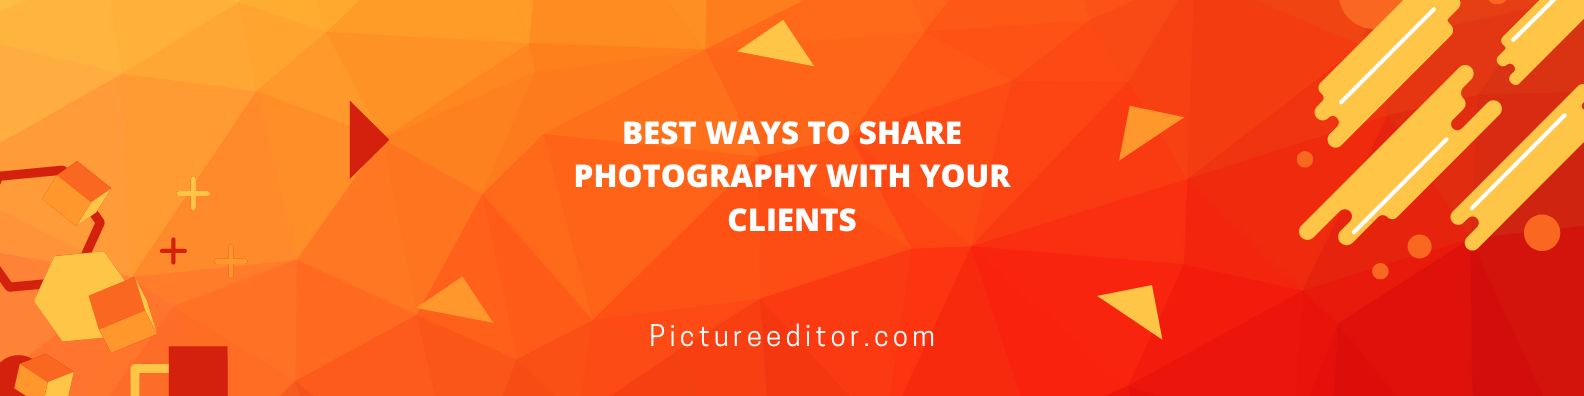 Best Ways to Share Photography With Your Clients